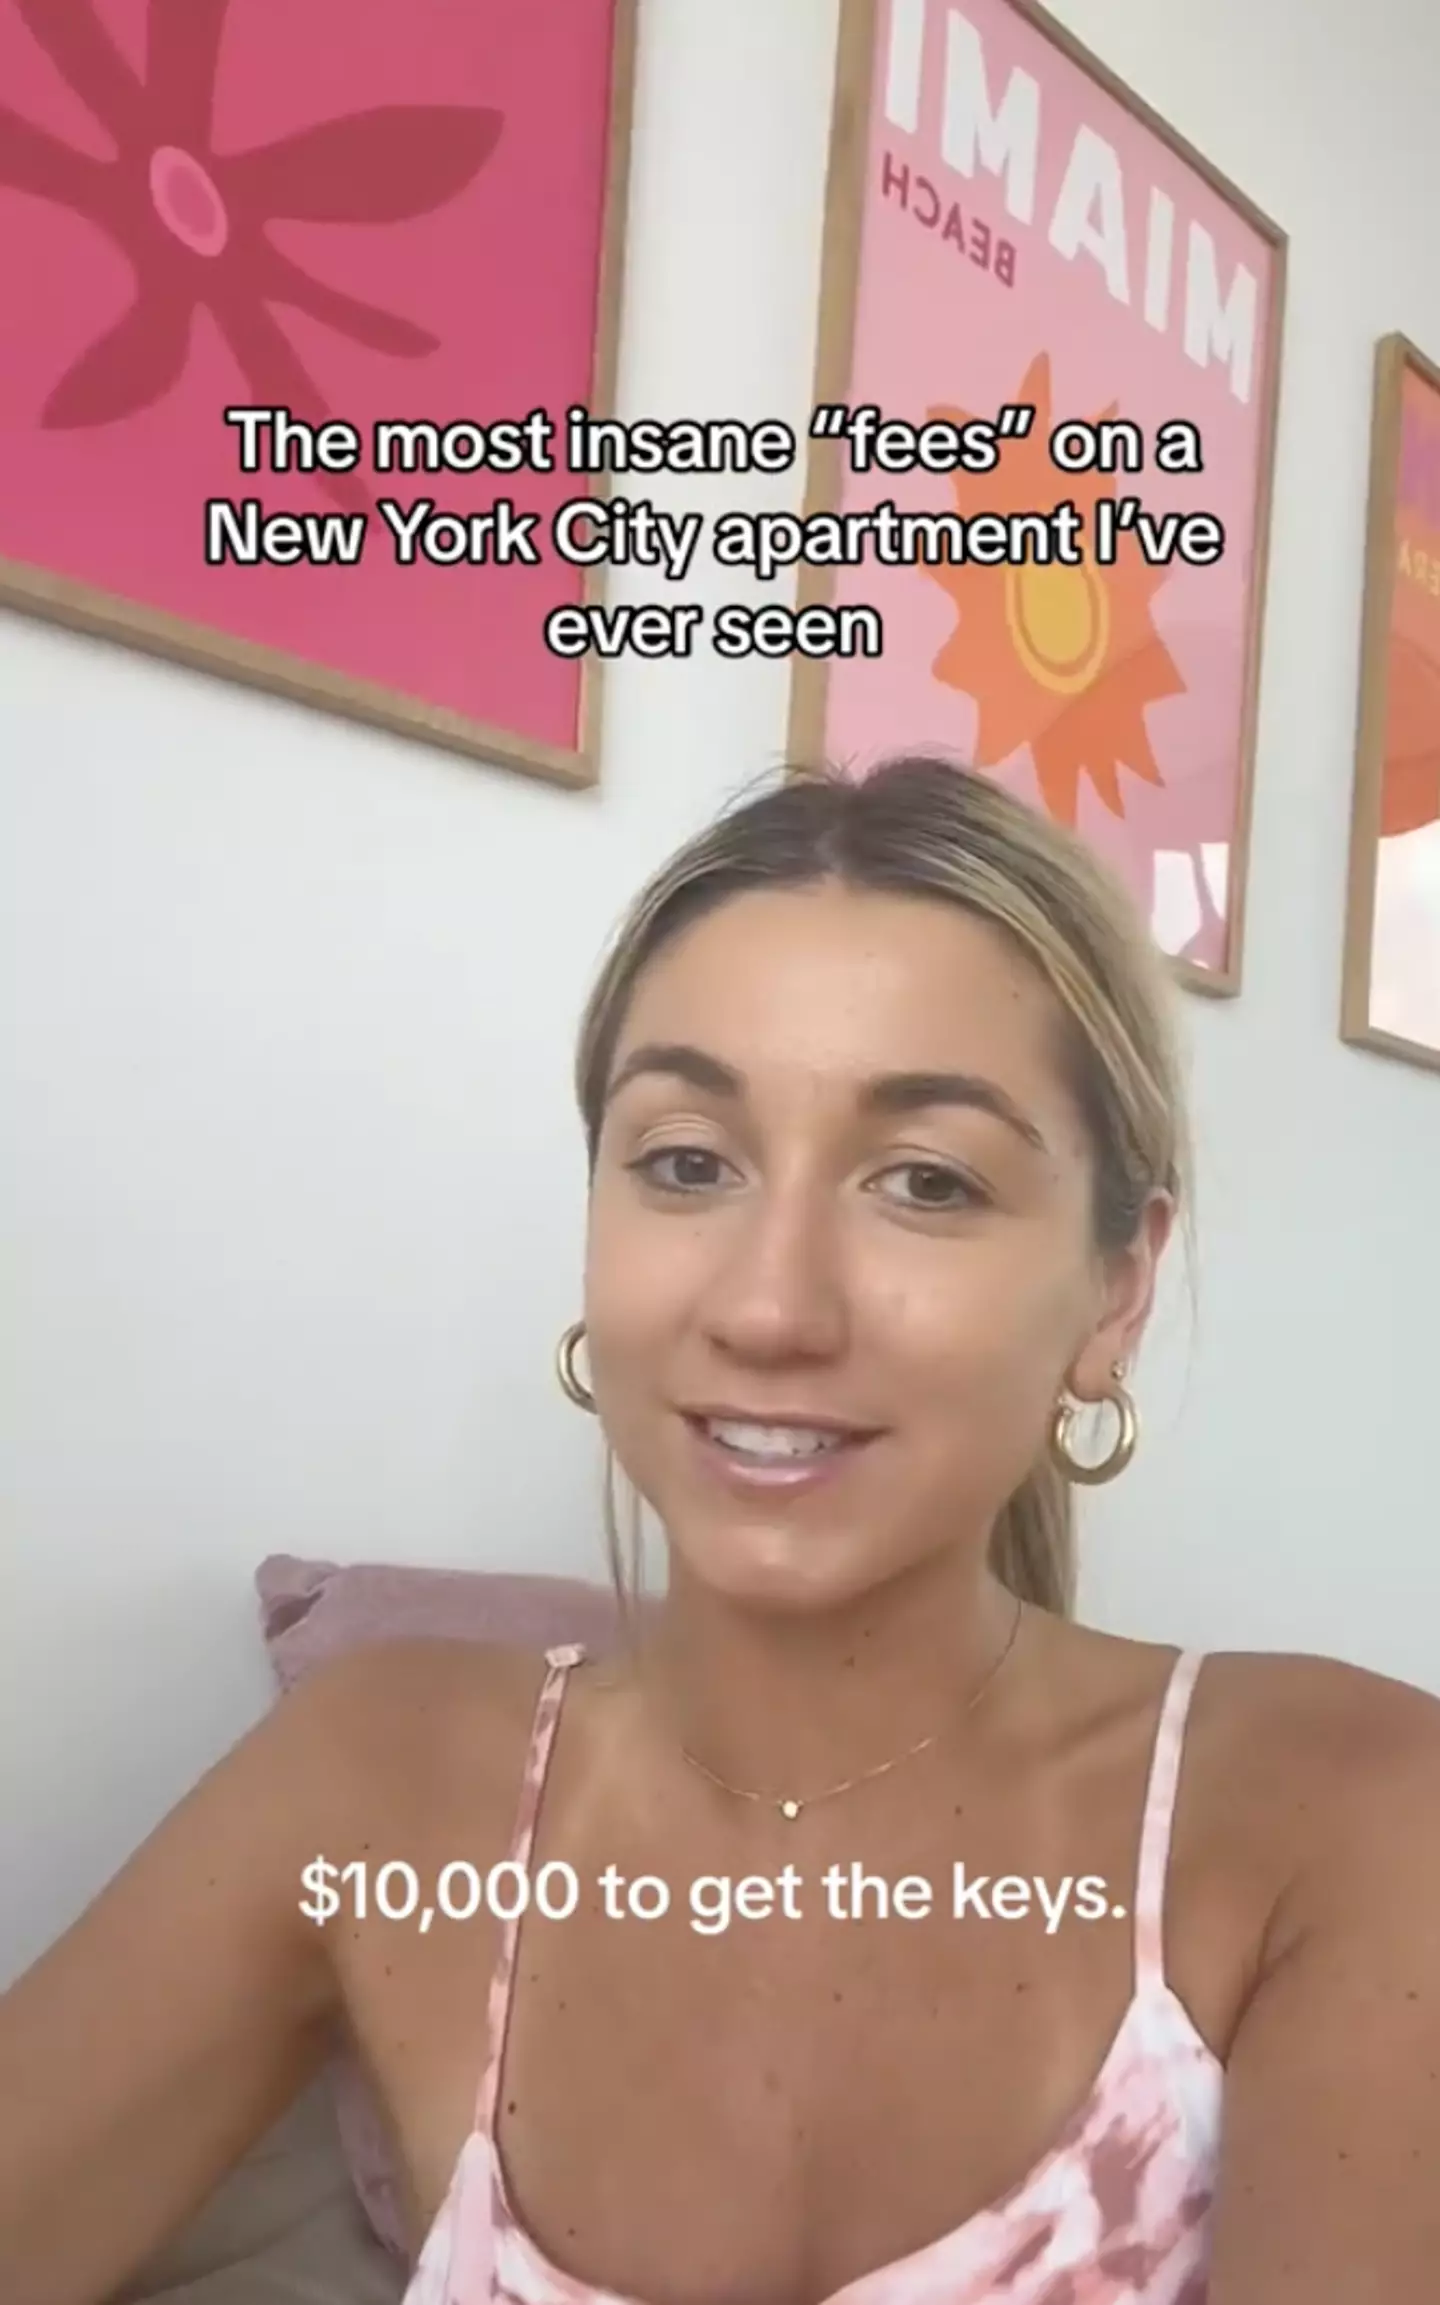 Piper Phillips has been trying to find an apartment in New York.